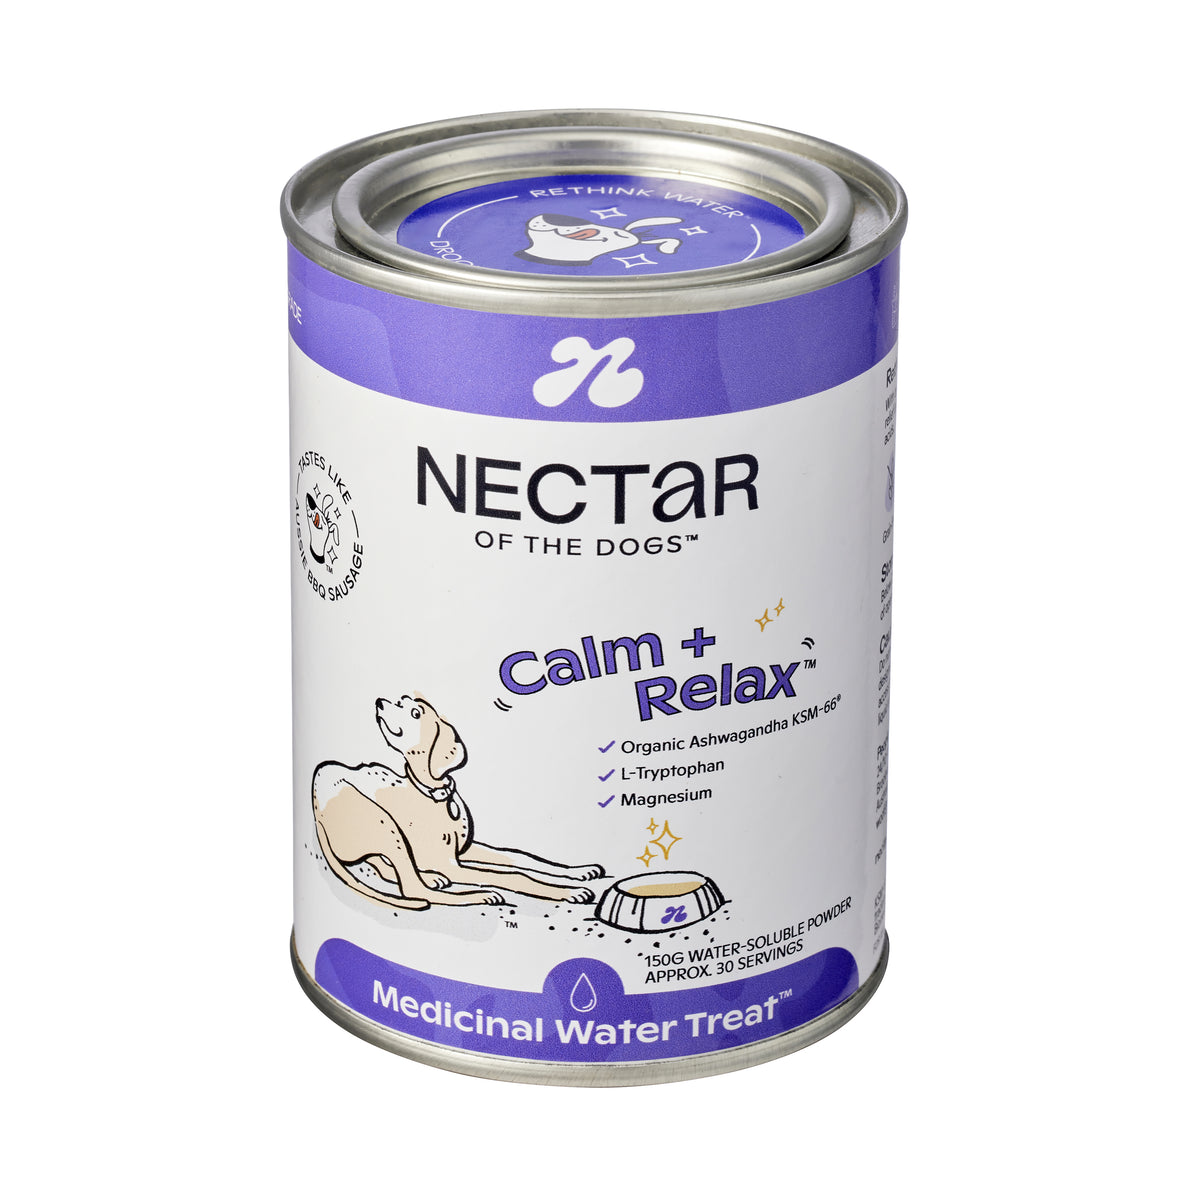 Nectar of the Dogs Calm + Relax Powder 150g